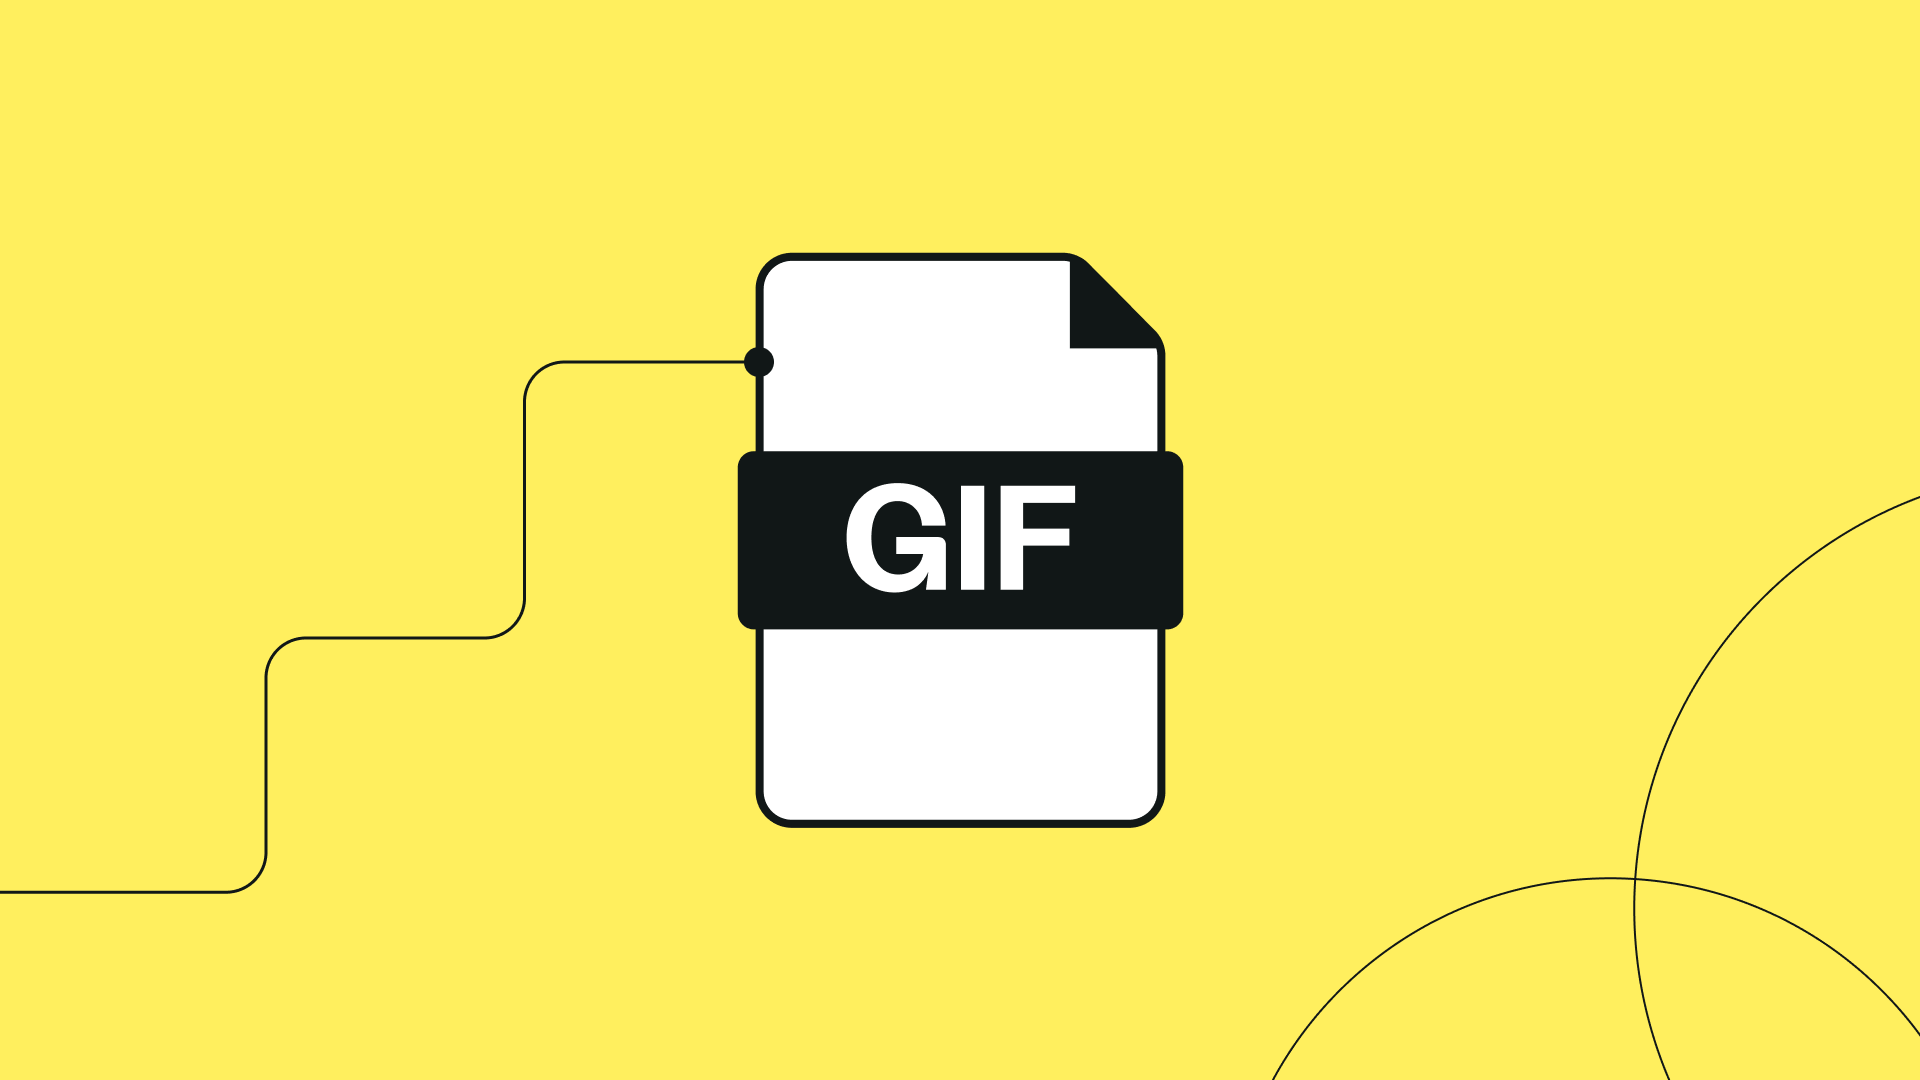 How to save frames of a GIF as individual images on Mac & iOS